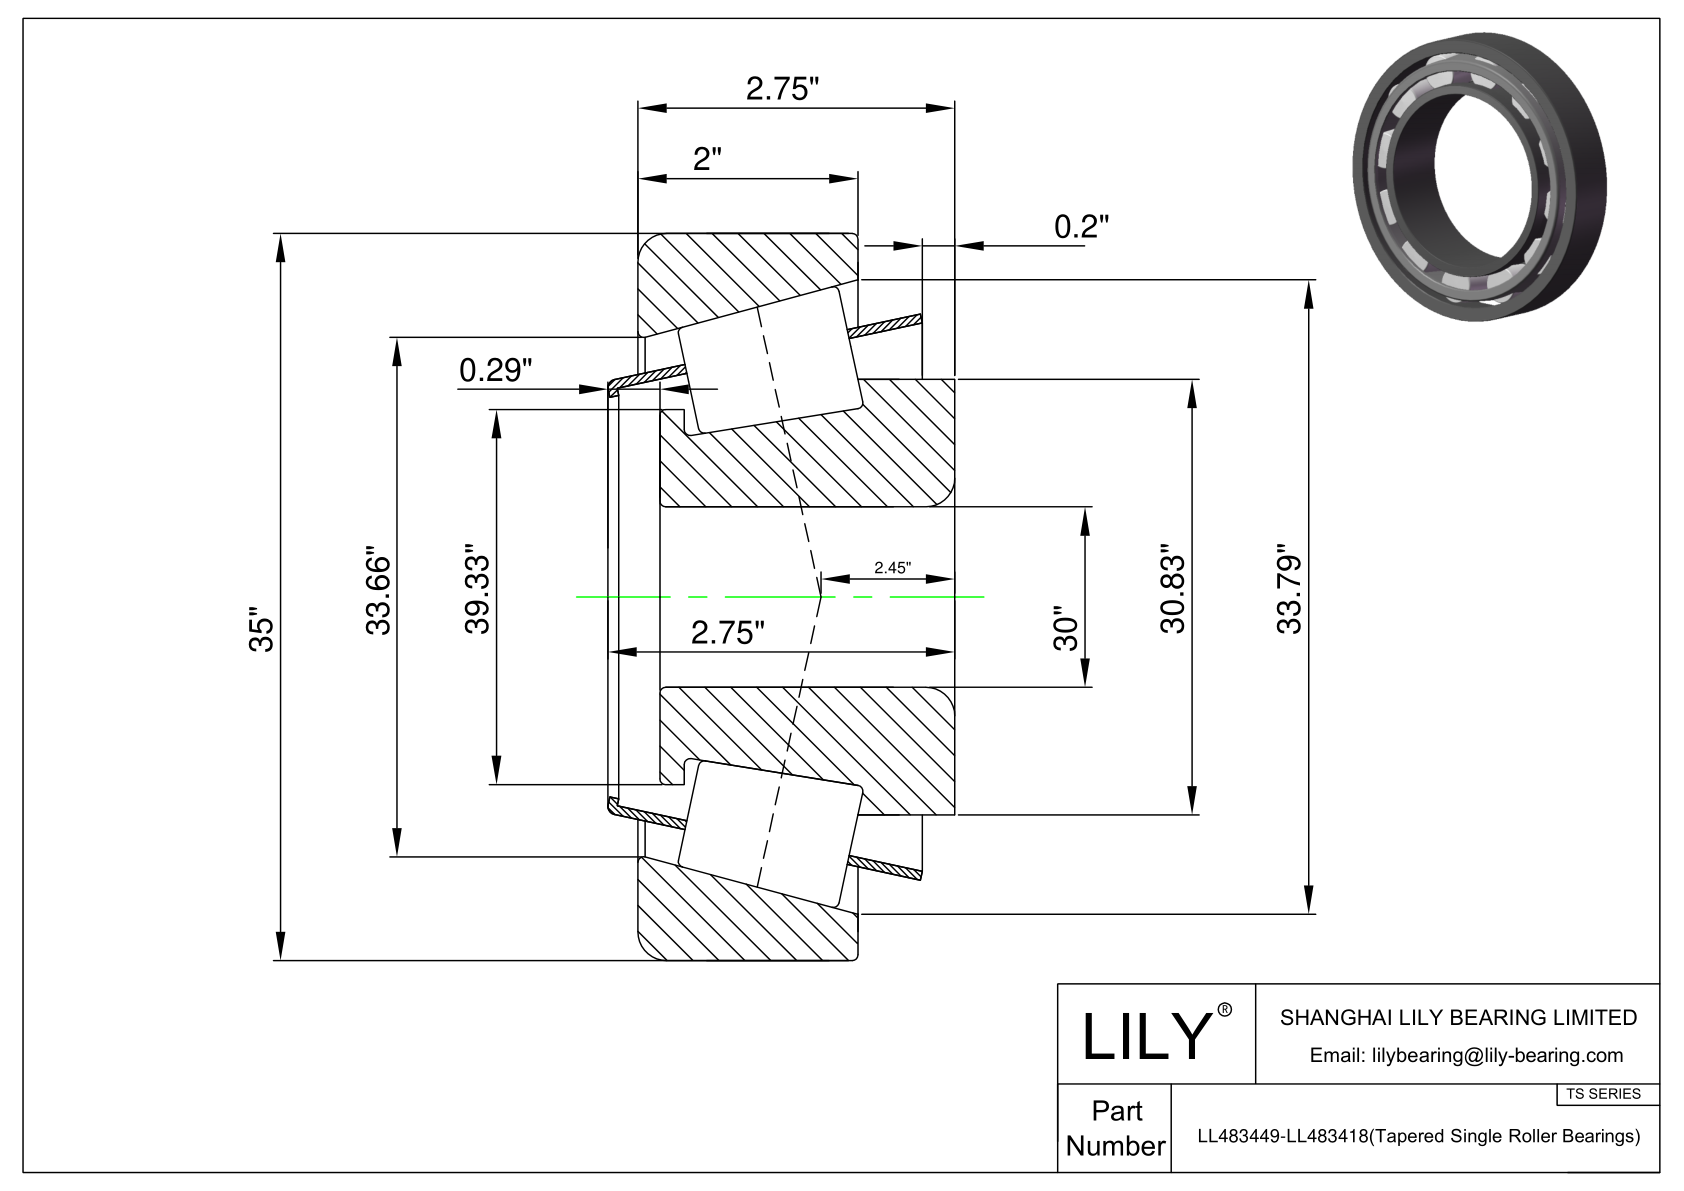 LL483449-LL483418 TS (Tapered Single Roller Bearings) (Imperial) cad drawing